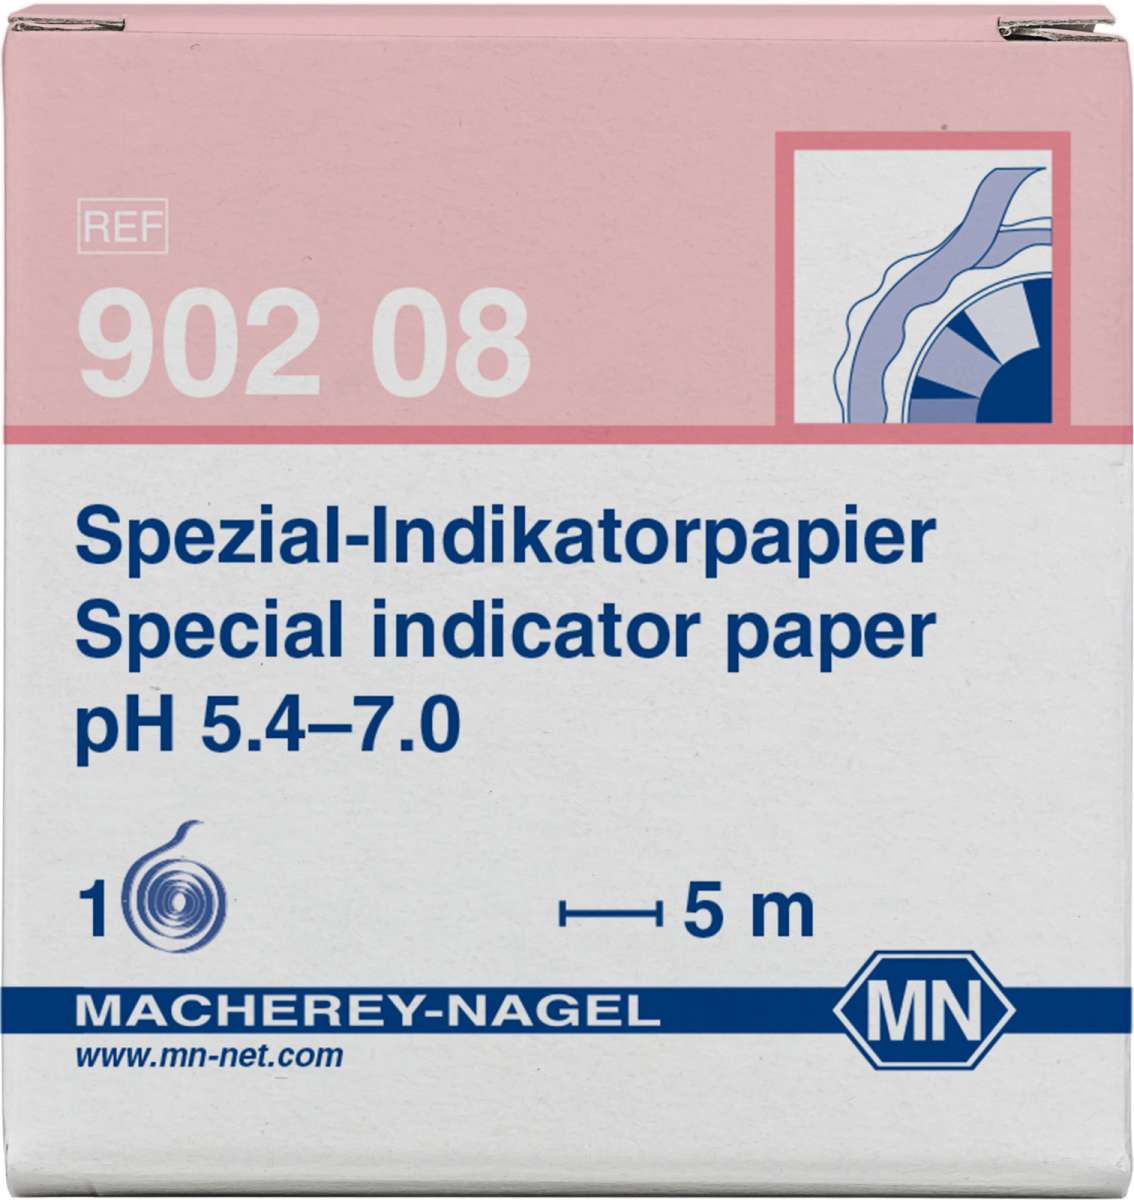 Refill pack for Special indicator paper pH 5.4 to 7.0 (3 reels of 5m length and 7mm width)